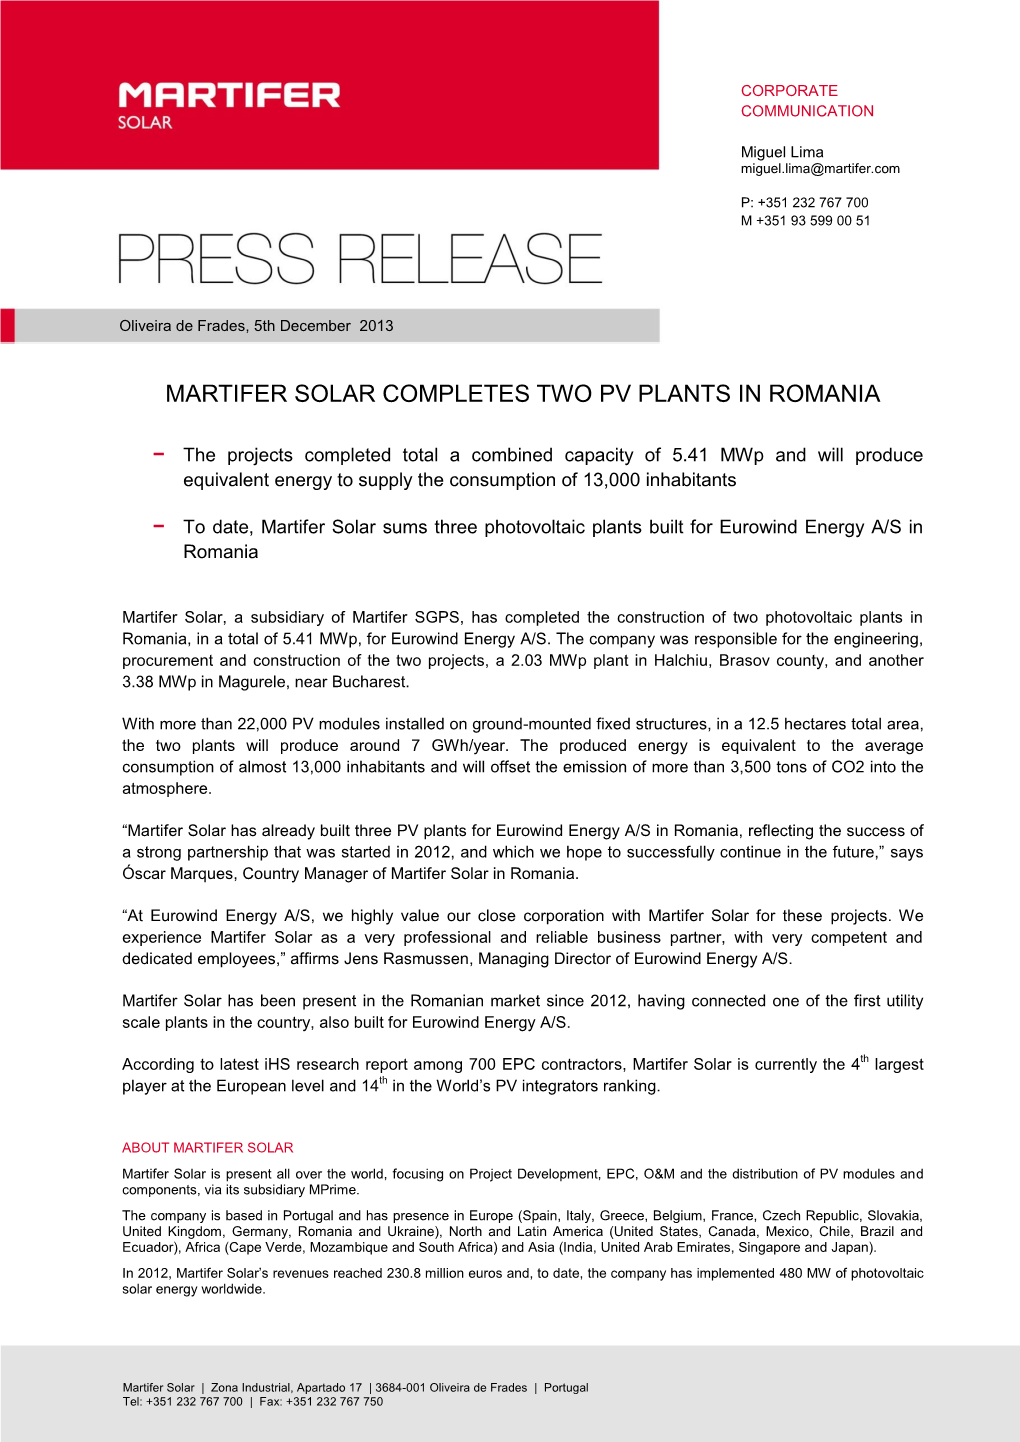 Martifer Solar Completes Two Pv Plants in Romania